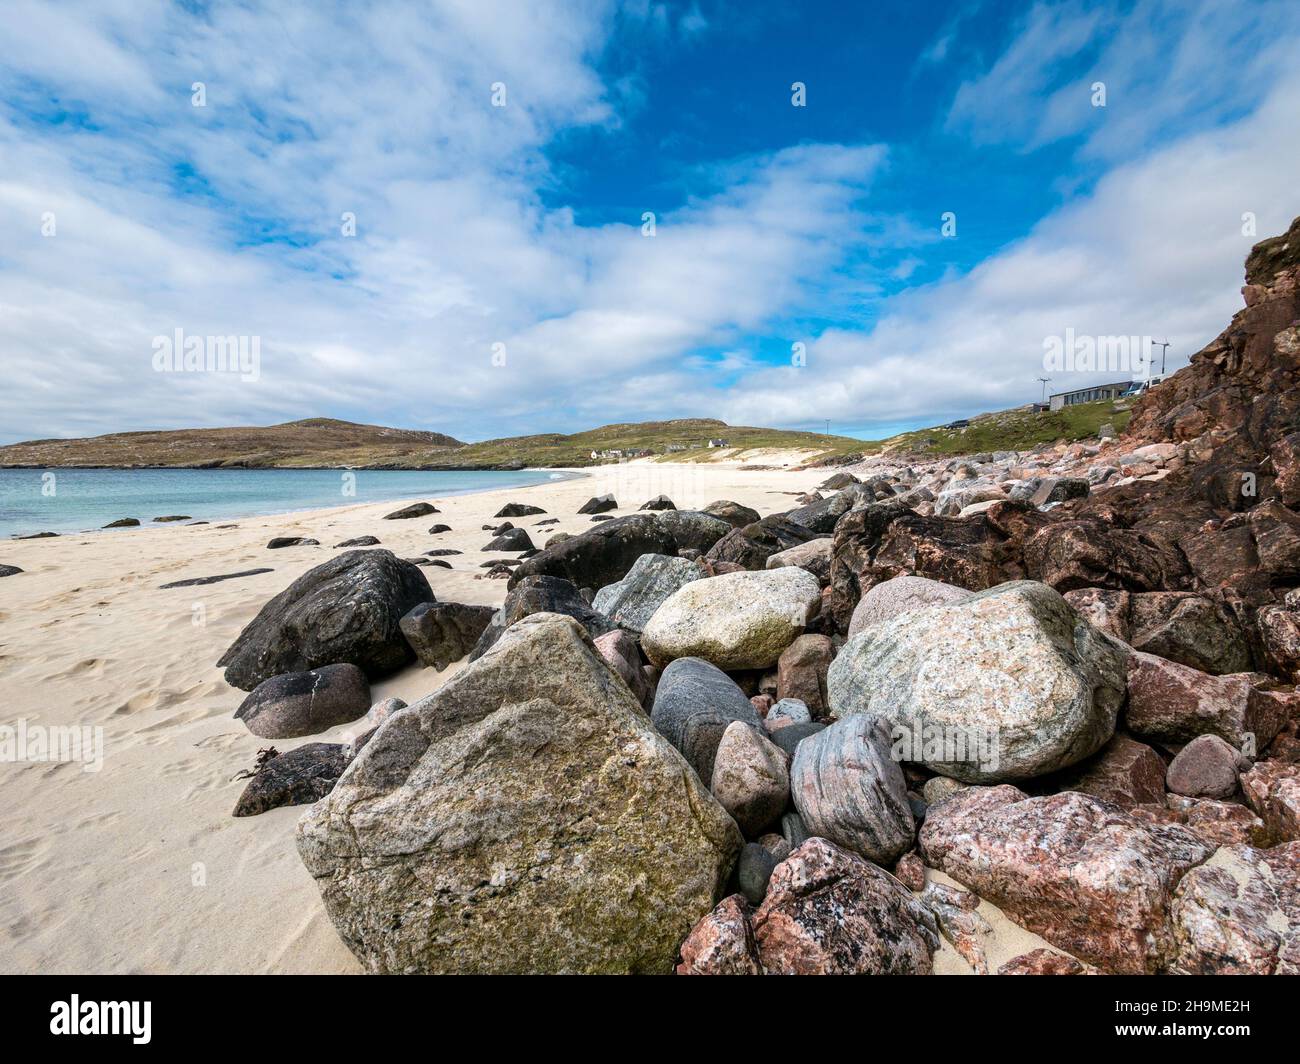 Pebbles, boulders and on the remote and beautiful deserted beach at Hushinish (Traigh Huisinis) in May, Isle of Harris, Outer Hebrides, Scotland, Stock Photo